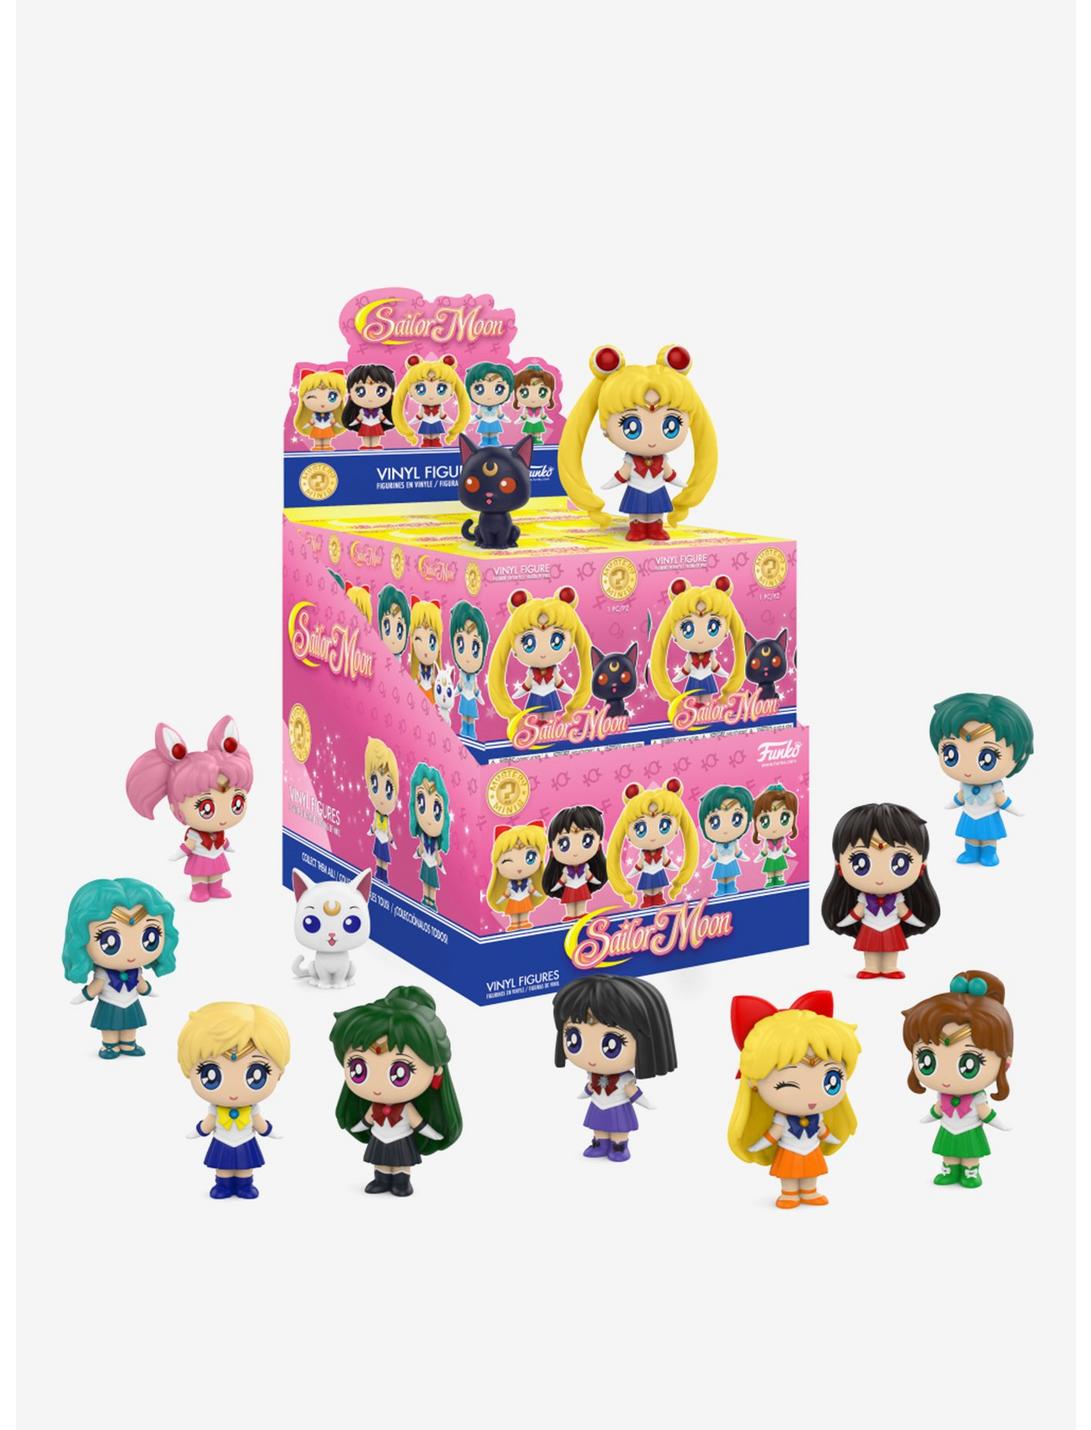 Sailor Moon S1 Mystery Minis (SEALED CASE OF 12) Hot Topic Exclusive